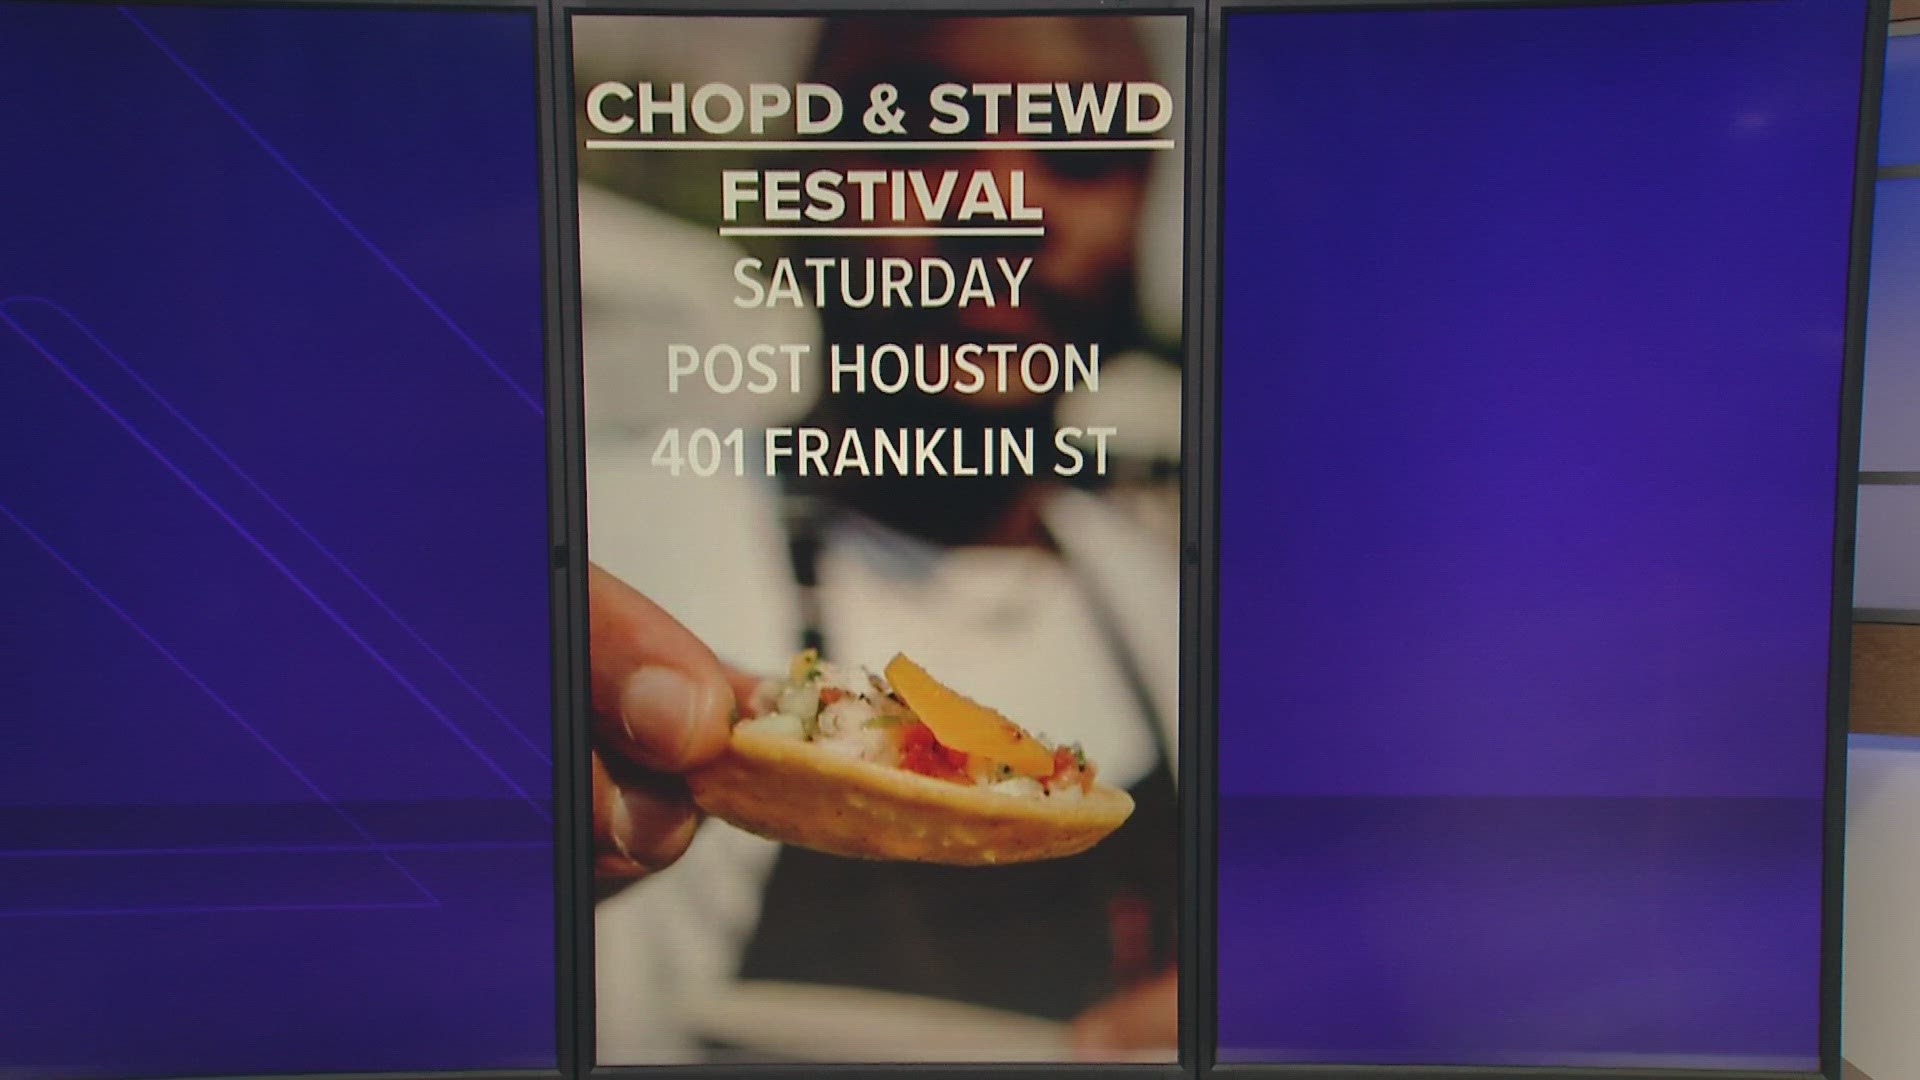 Looking for something to do in Houston the weekend of Sept. 30? There is a Polish festival and a culinary festival celebrating the West African culture.